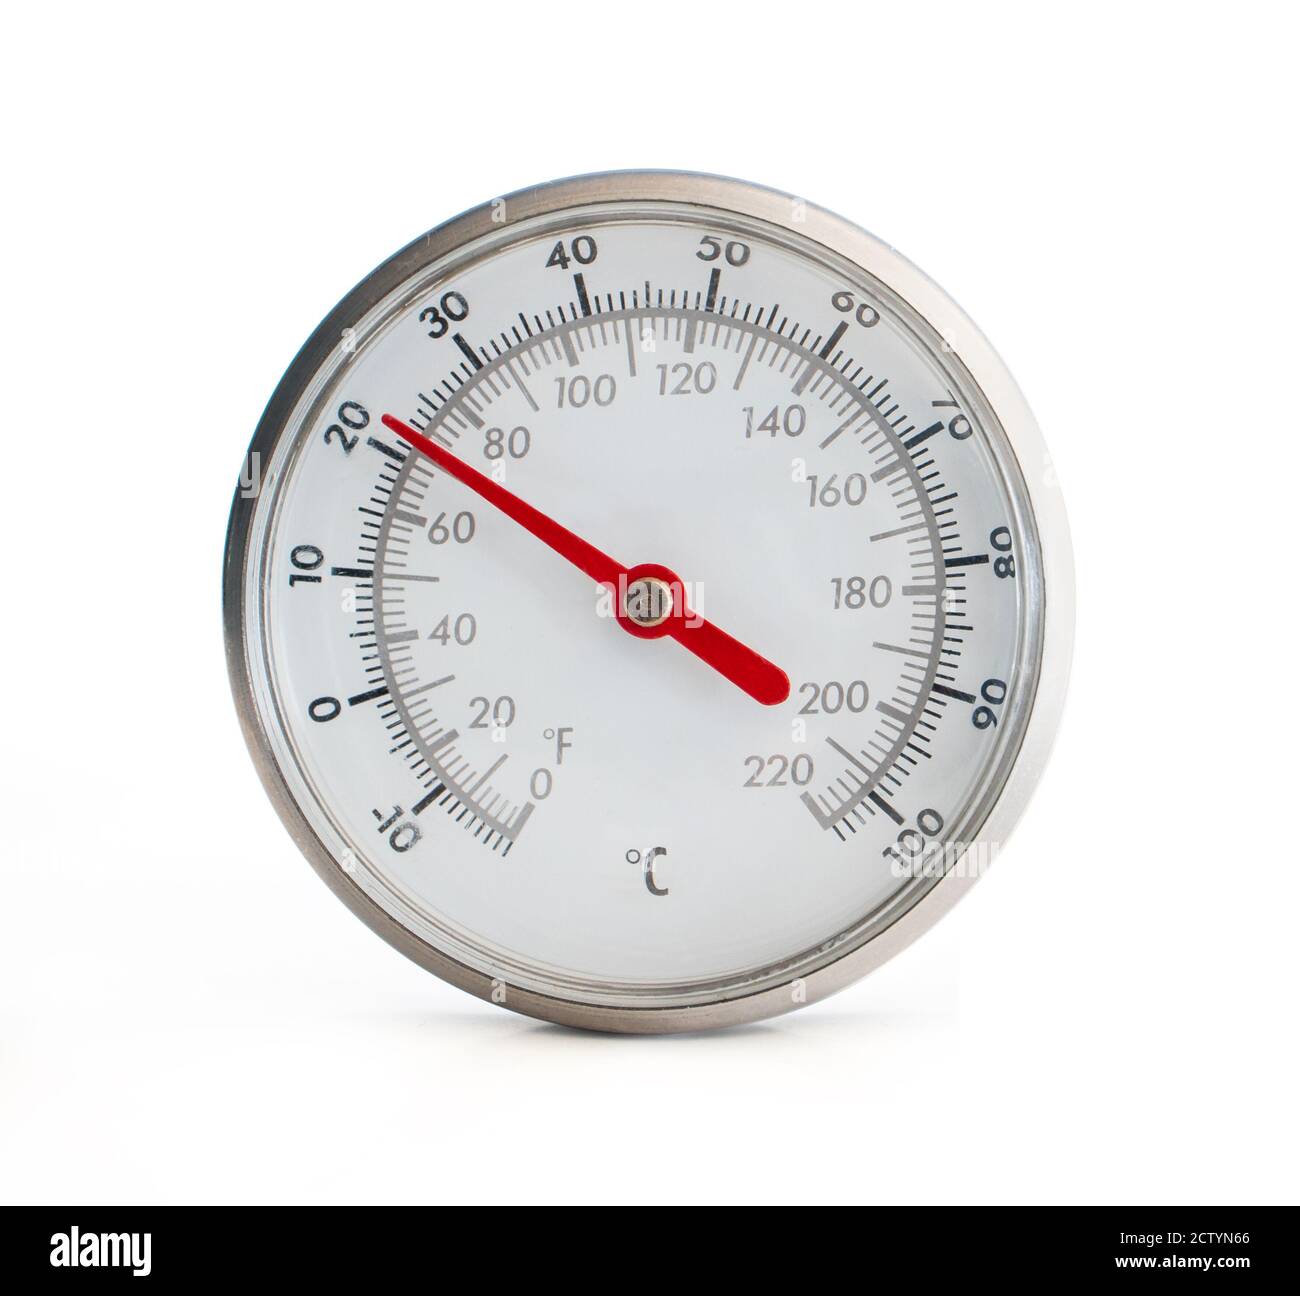 https://c8.alamy.com/comp/2CTYN66/instant-read-thermometer-front-view-close-up-temperature-gauge-in-fahrenheit-and-celsius-check-your-meat-for-food-save-temperature-isolated-2CTYN66.jpg